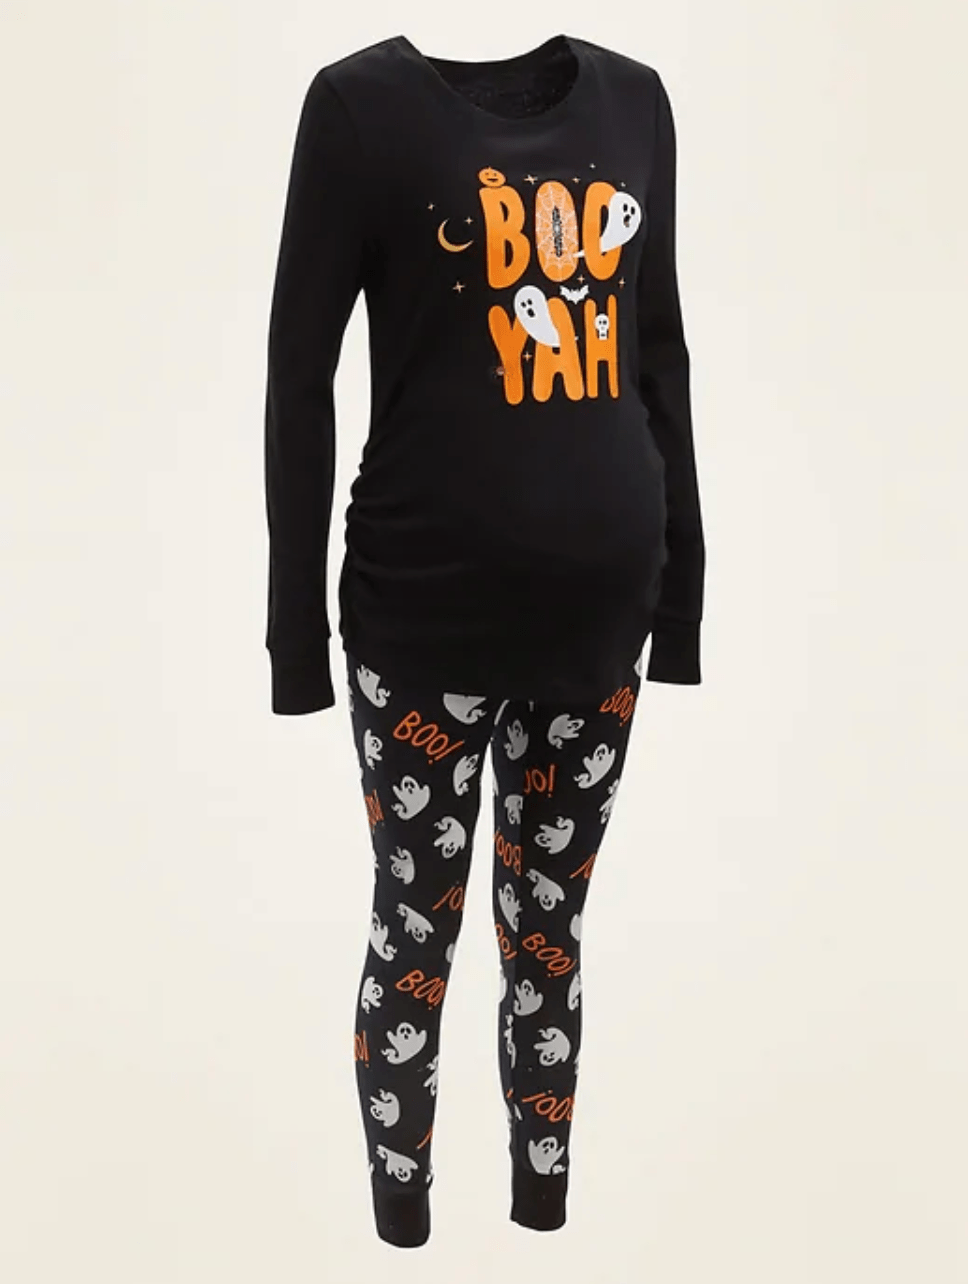 Old Navy Is Selling Halloween Pajamas For The Entire Family And They